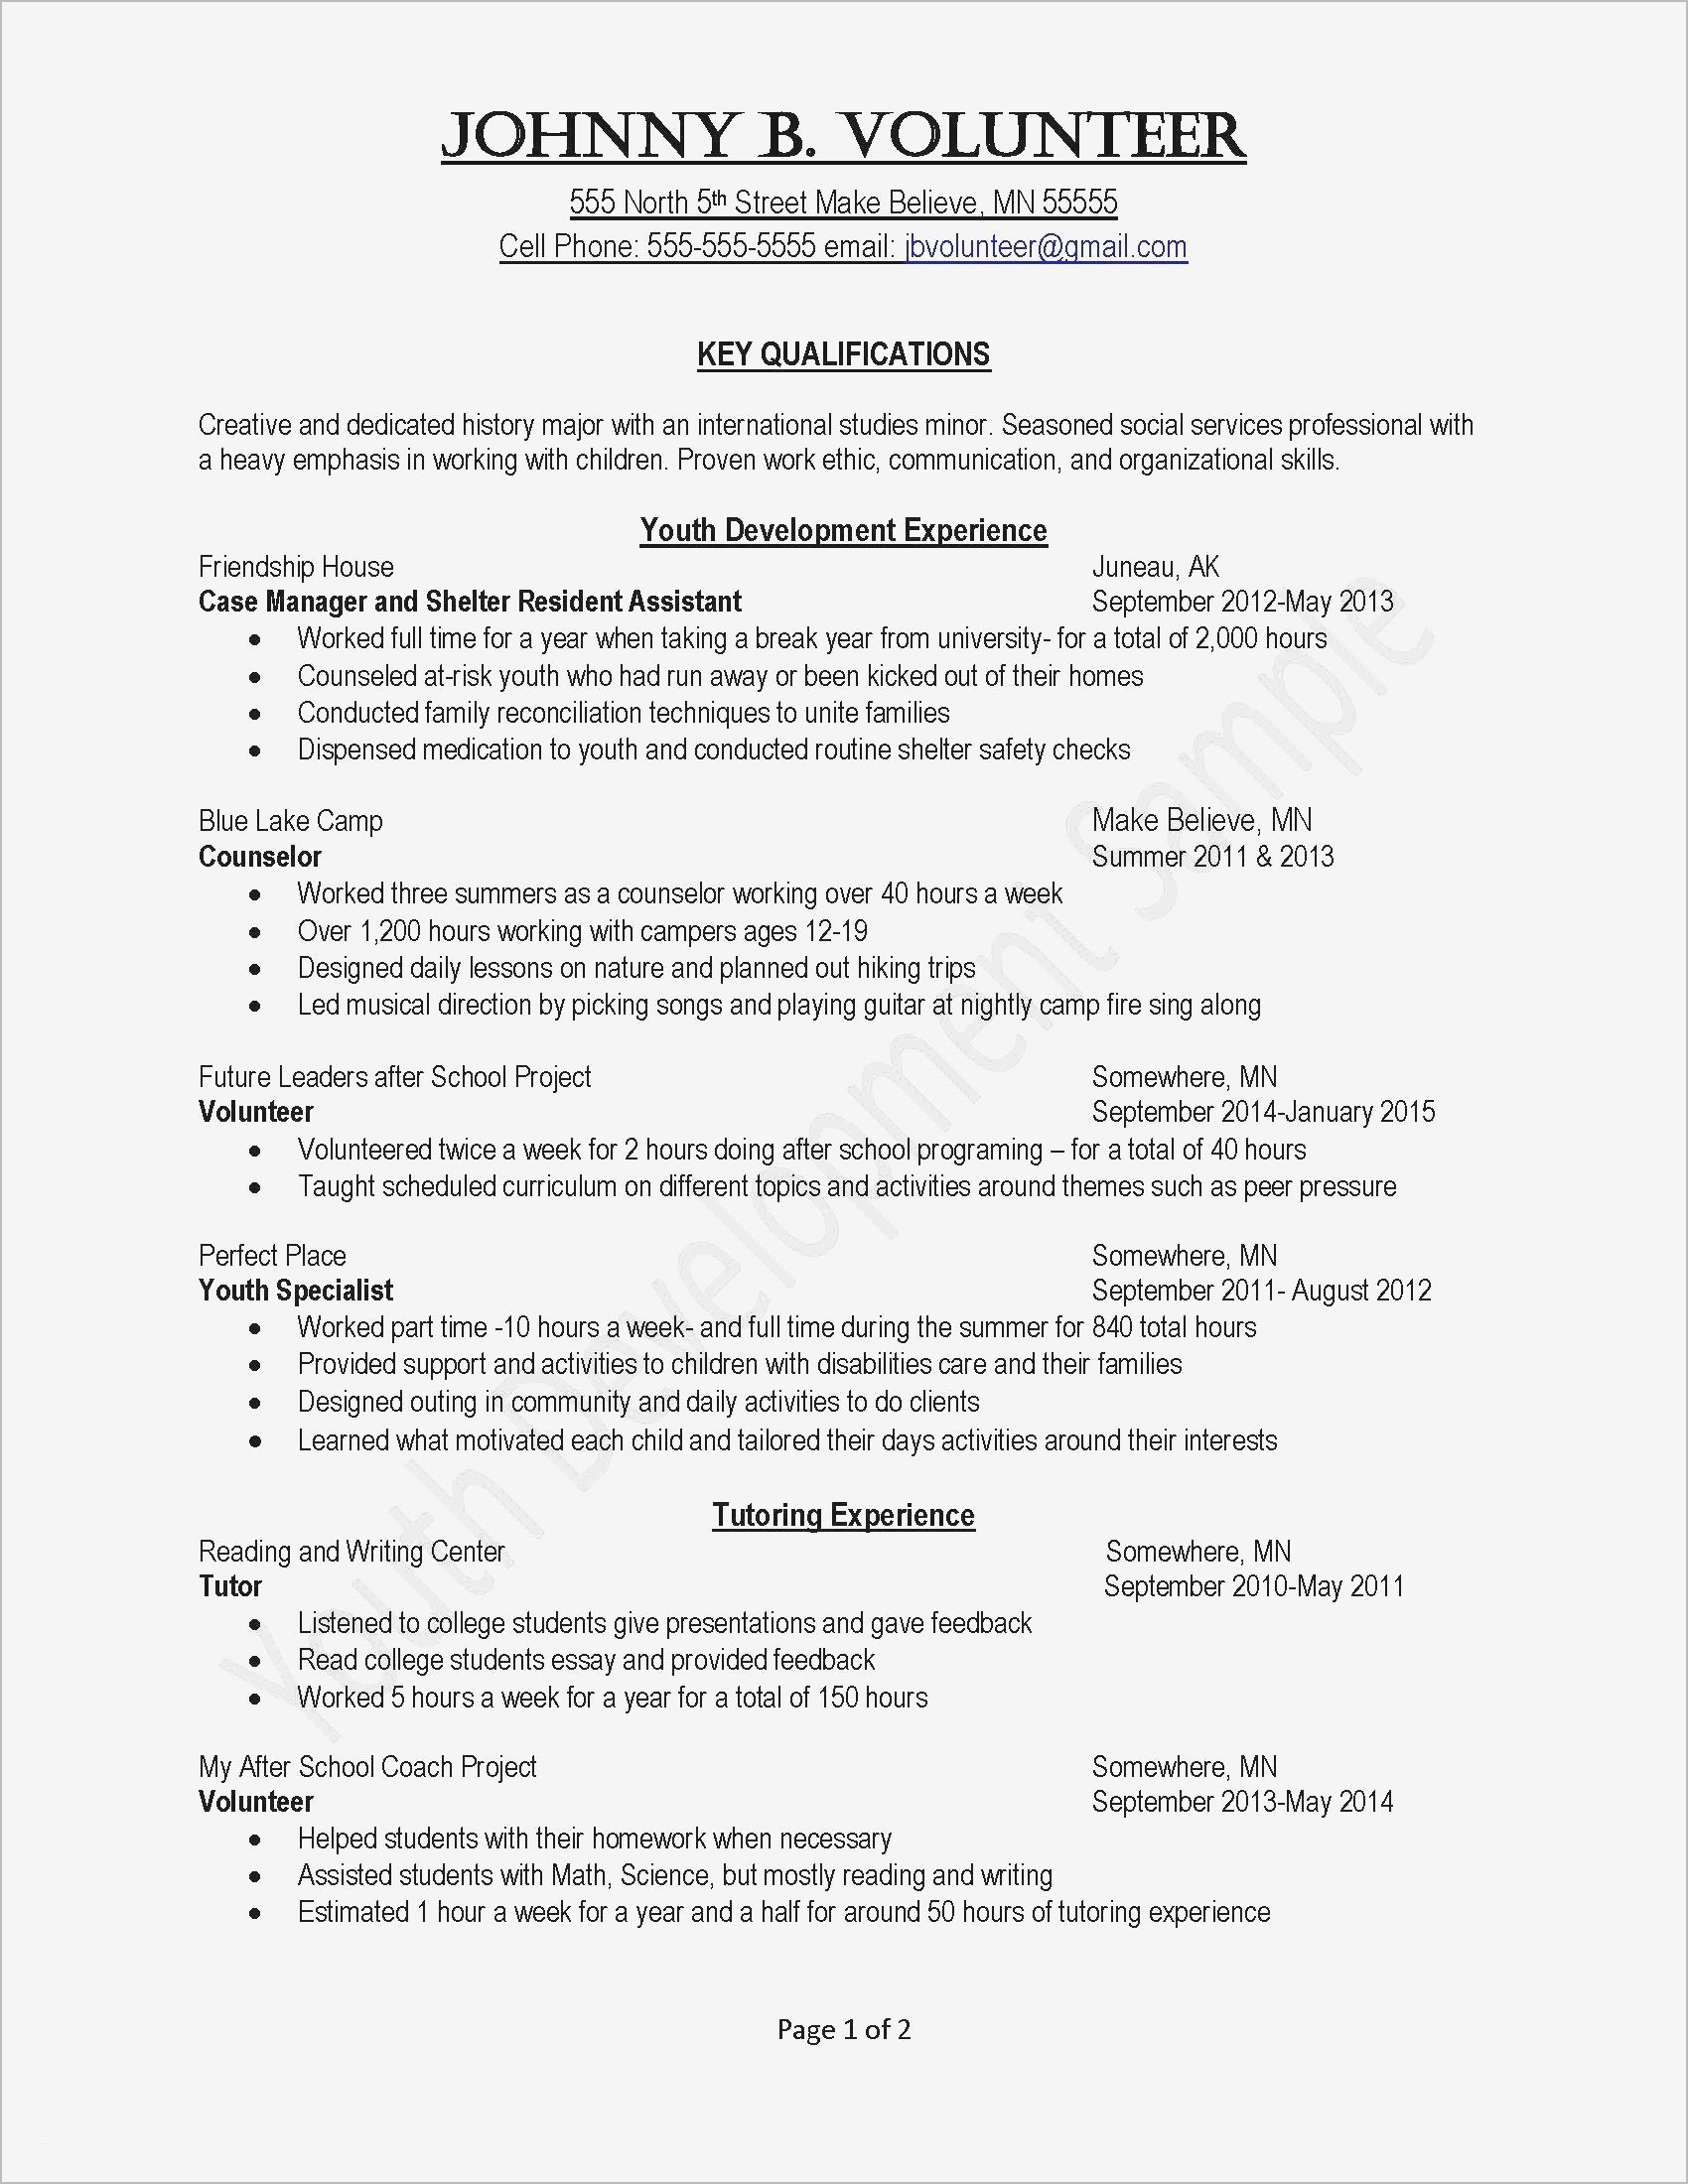 Job Cover Letter Template - Activities Resume Template Valid Job Fer Letter Template Us Copy Od